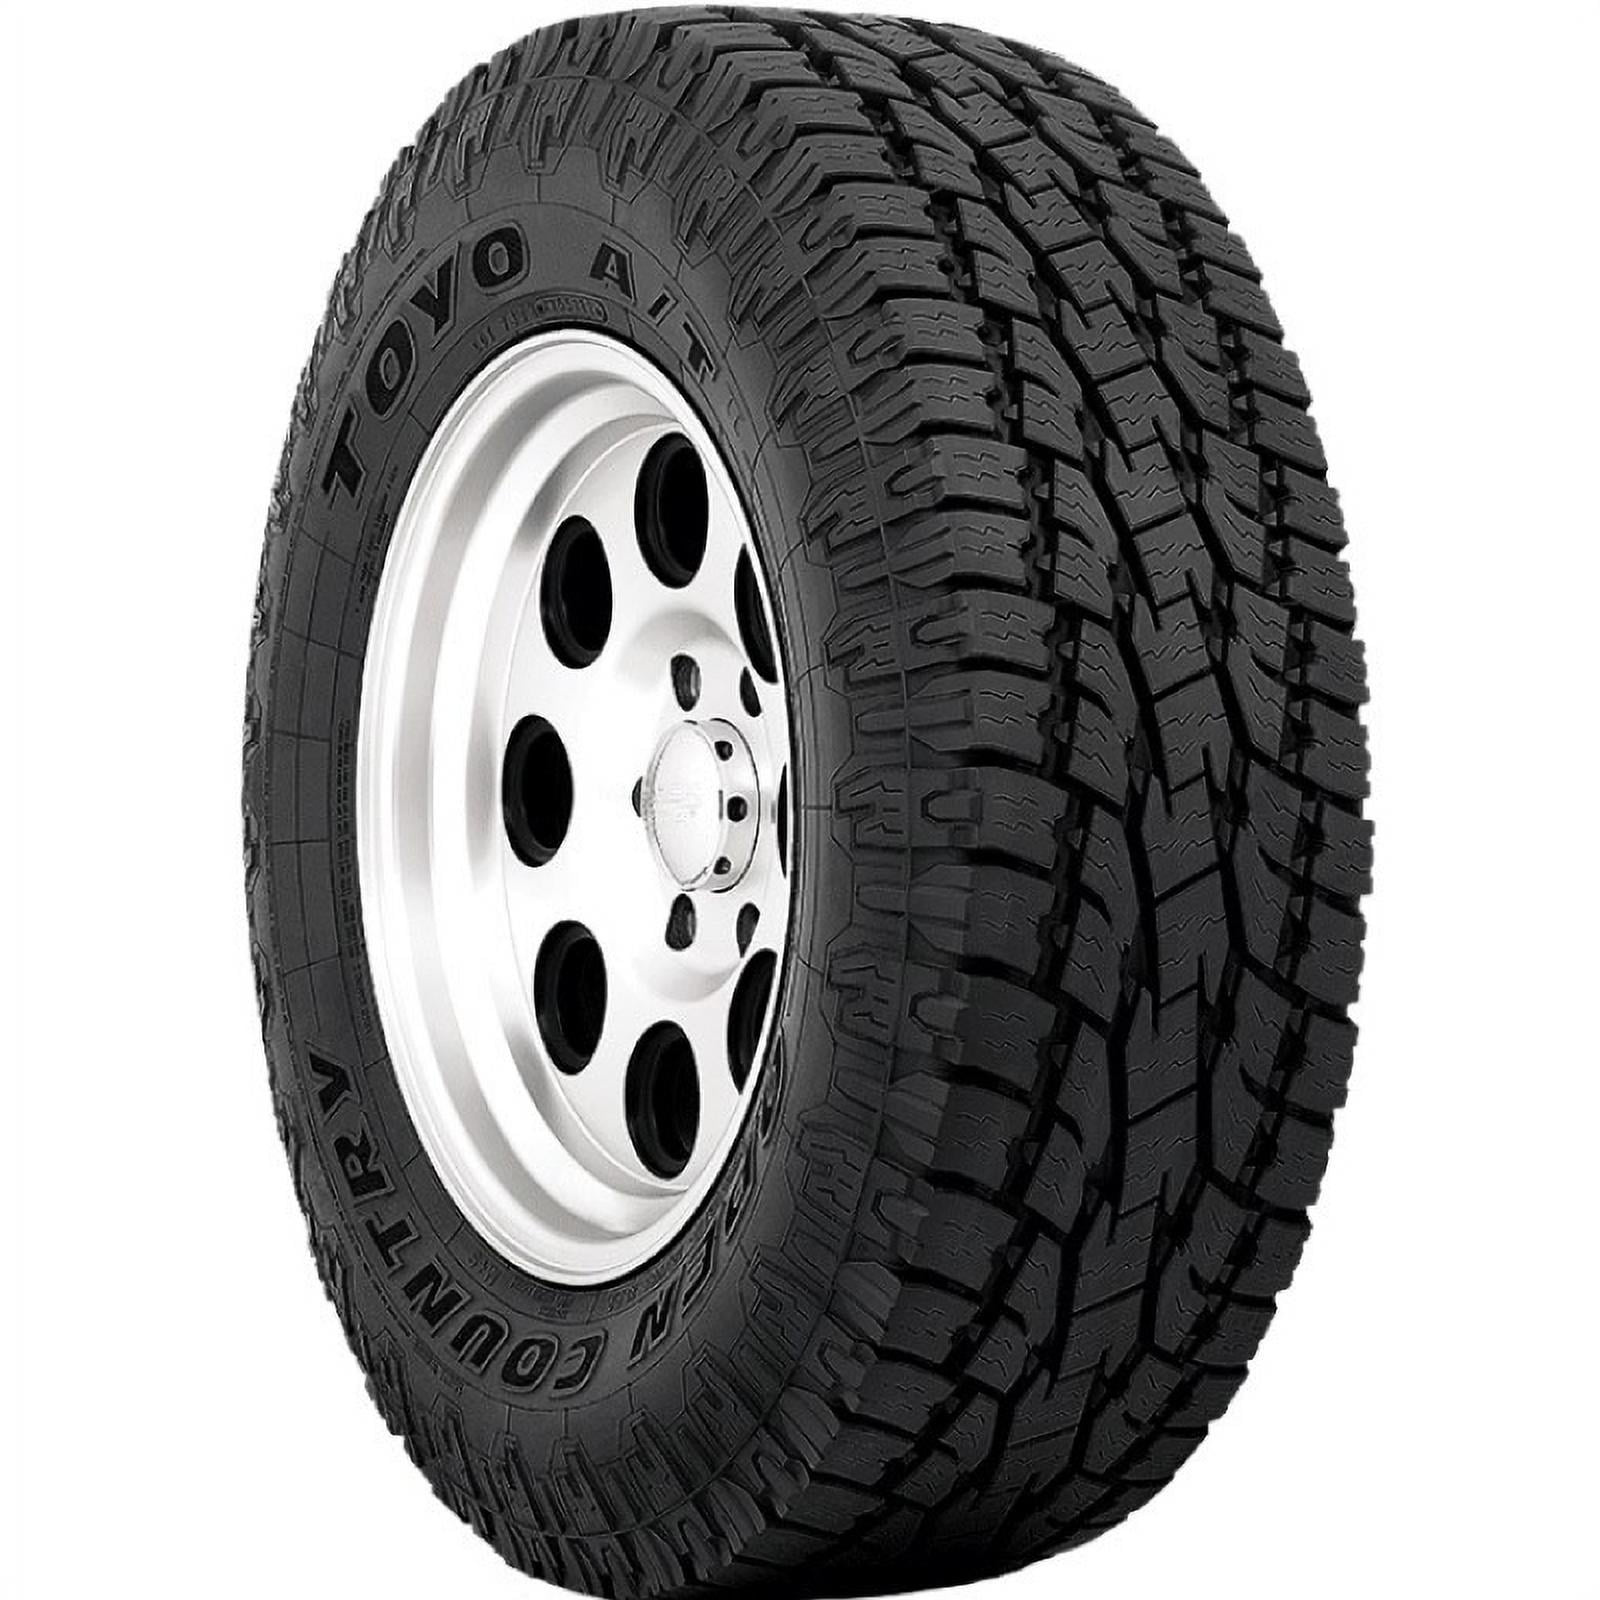 Season Radial Tire-LT265/75R16 112/109T C/6 112TT TOYO Open Country AT II All